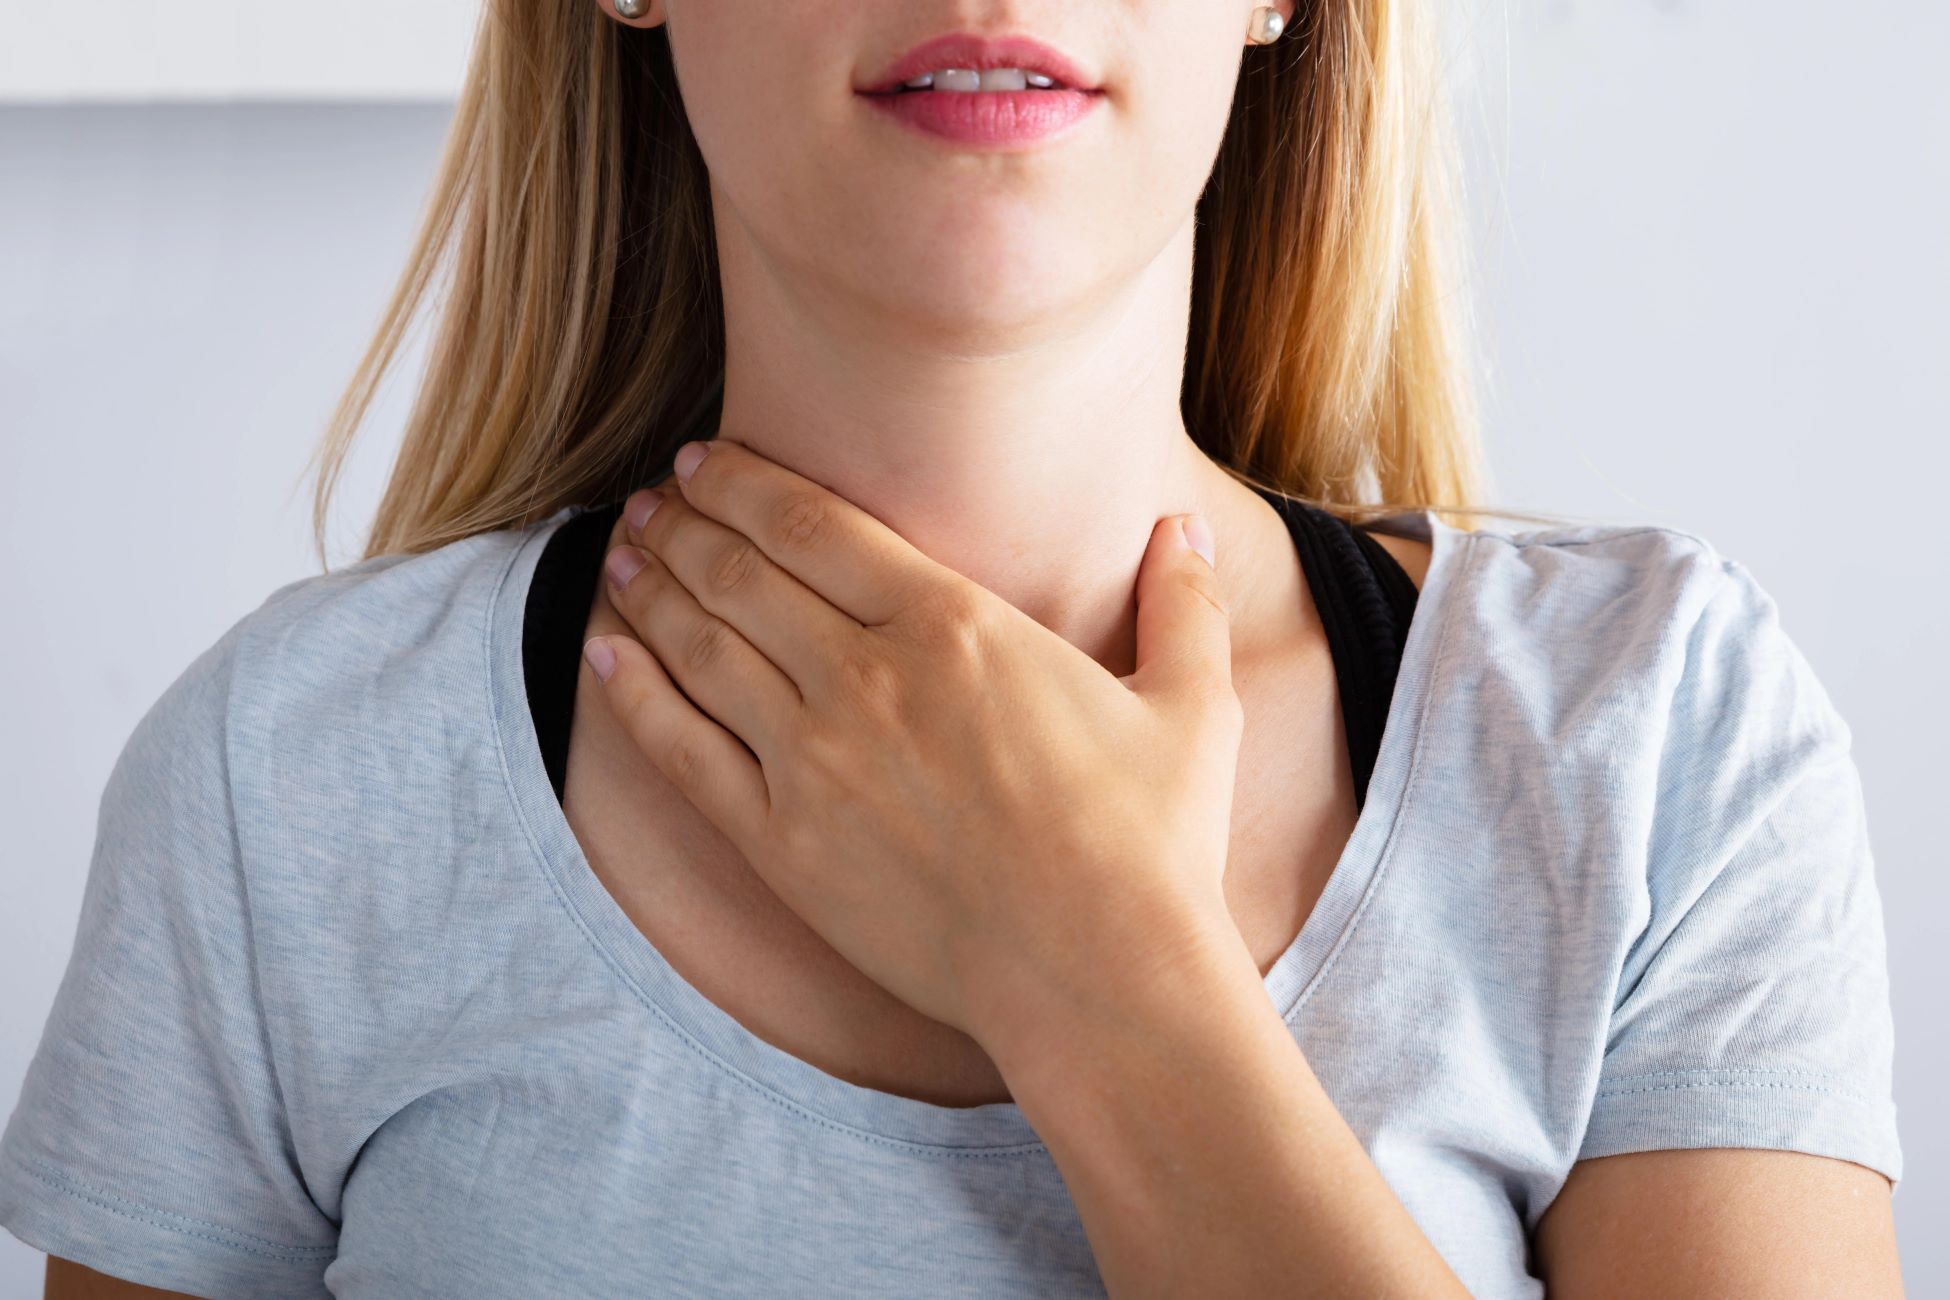 Causes Of Post-training Or Racing Sore Throat